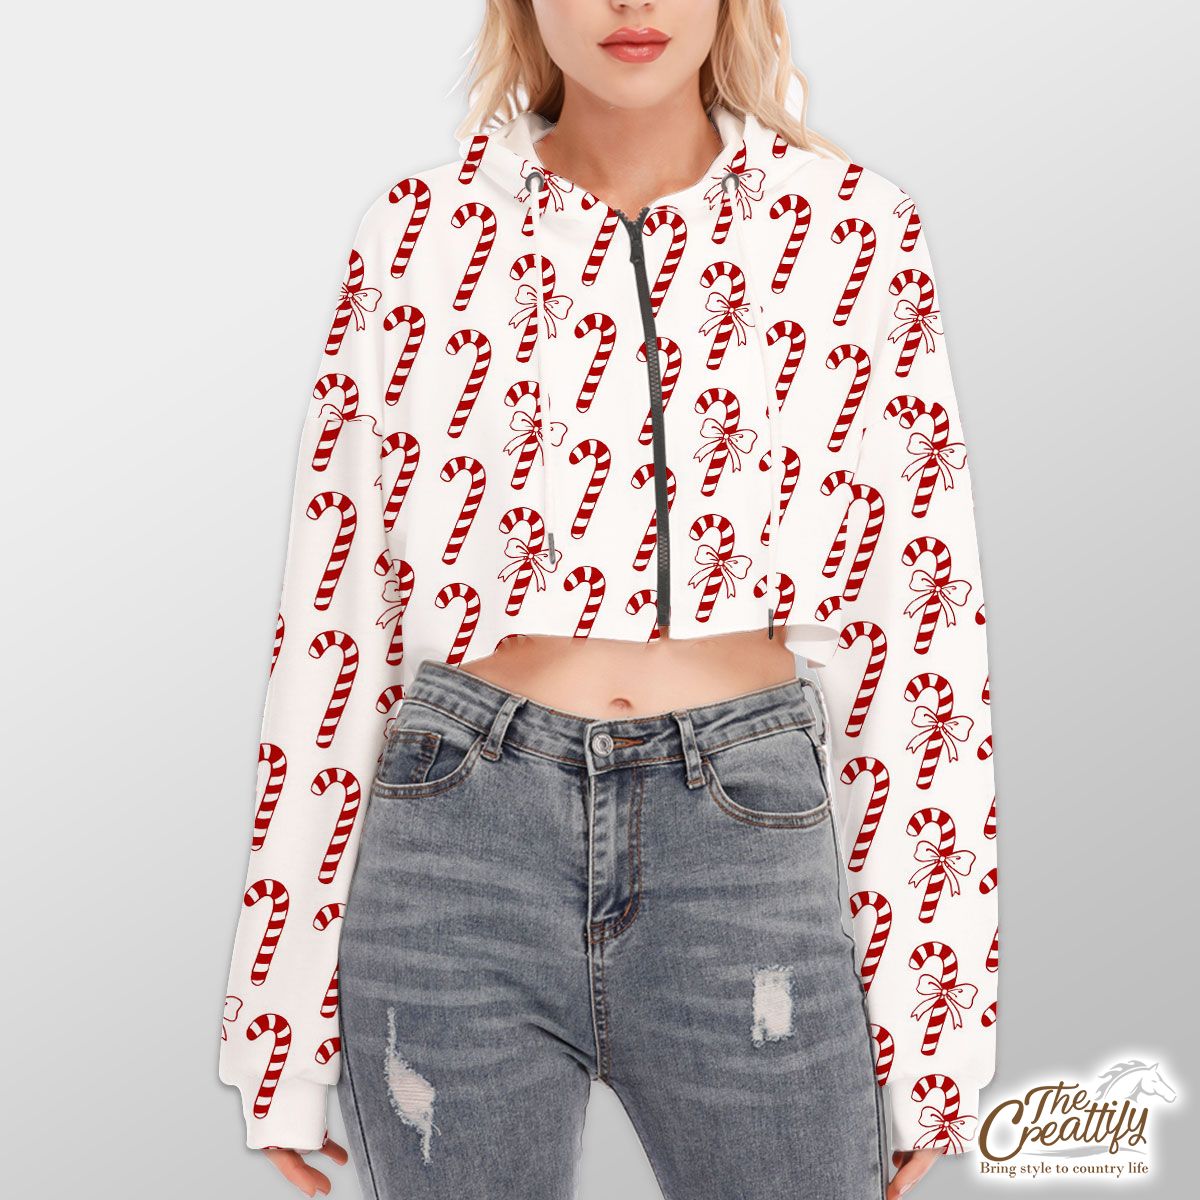 Christmas Candy Cane Seamless Pattern White Background Hoodie With Zipper Closure